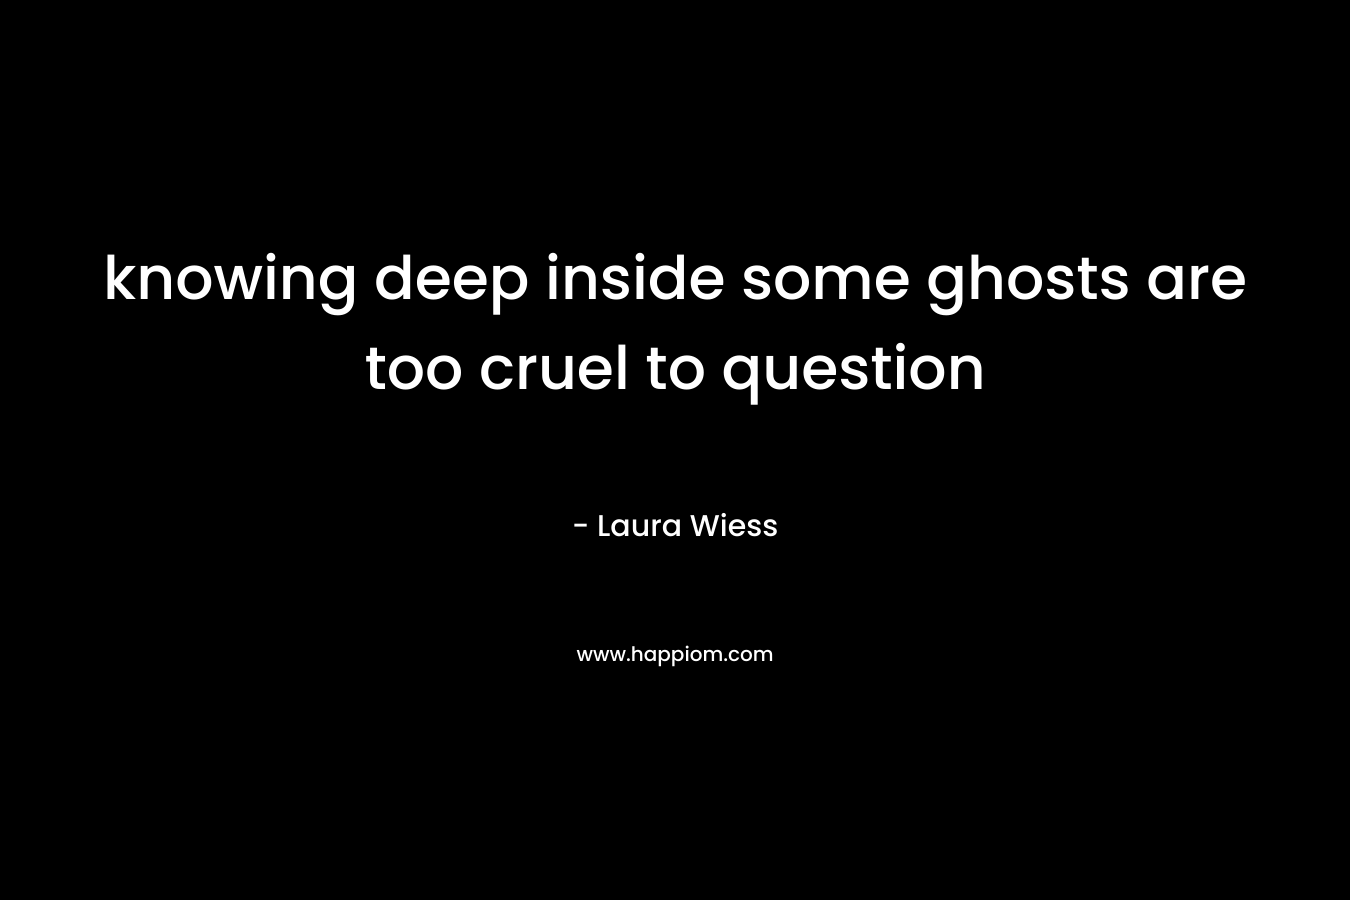 knowing deep inside some ghosts are too cruel to question